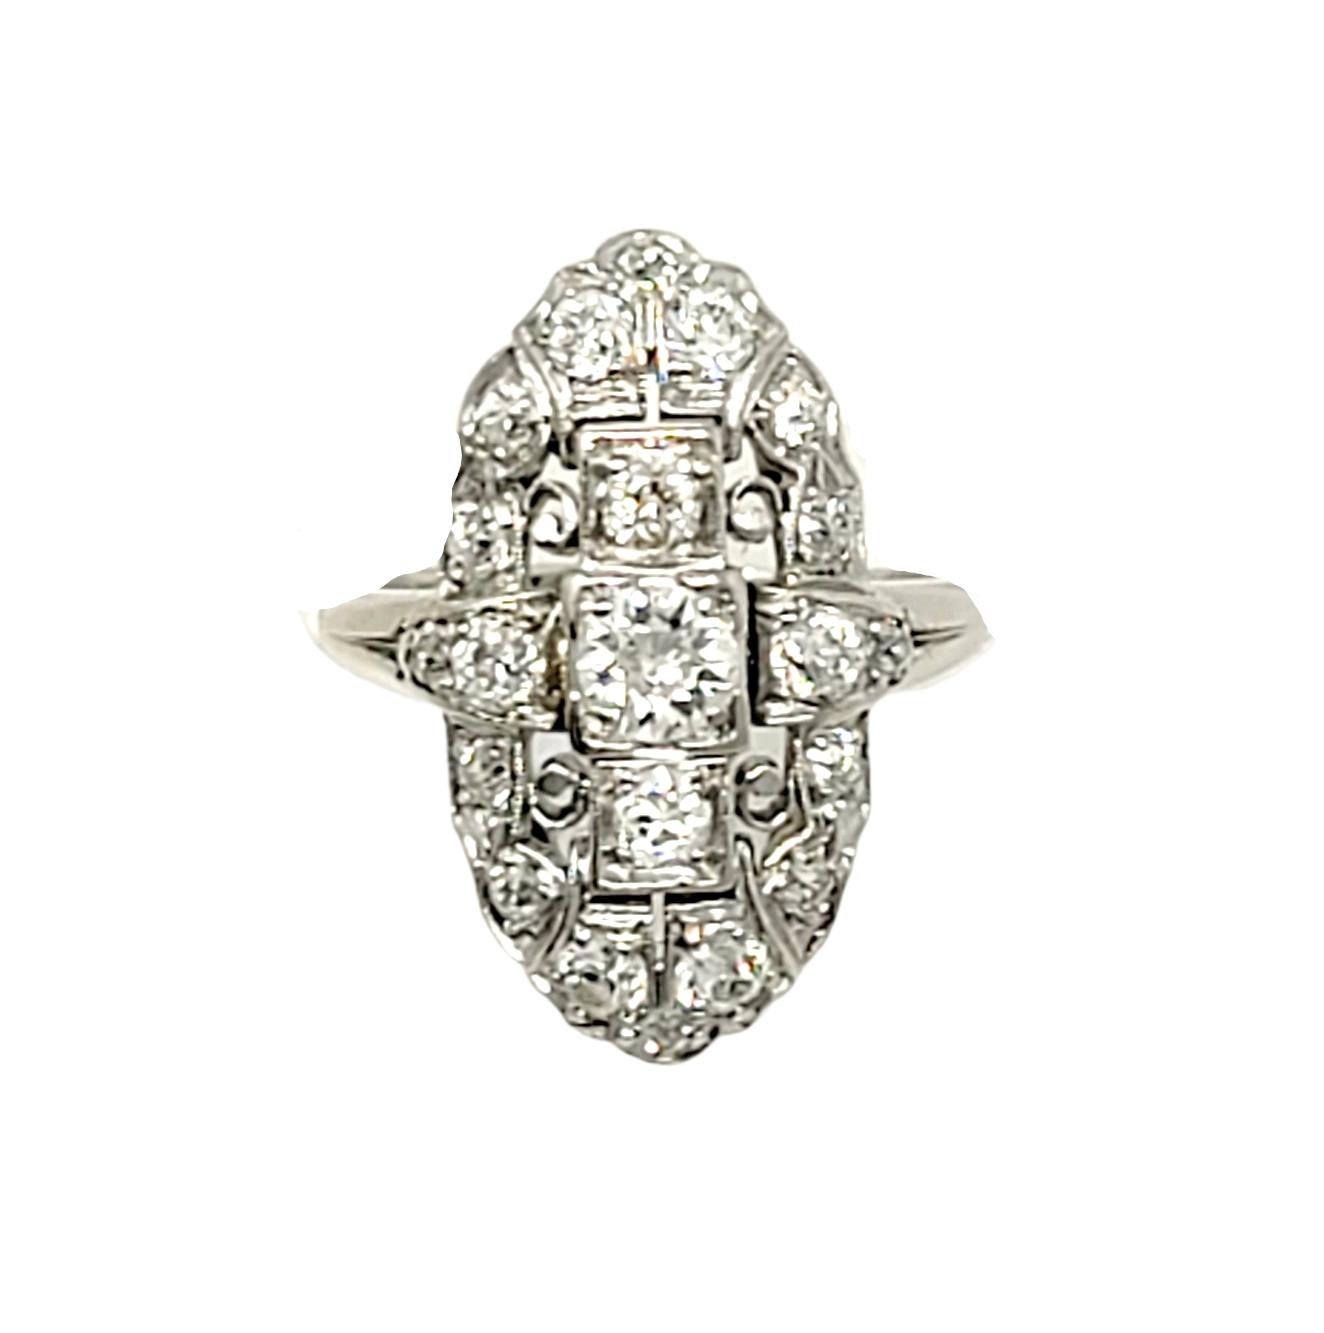 Vintage Old European Cut Diamond Navette Ring in Palladium 1.75 Carats Total In Good Condition For Sale In Scottsdale, AZ